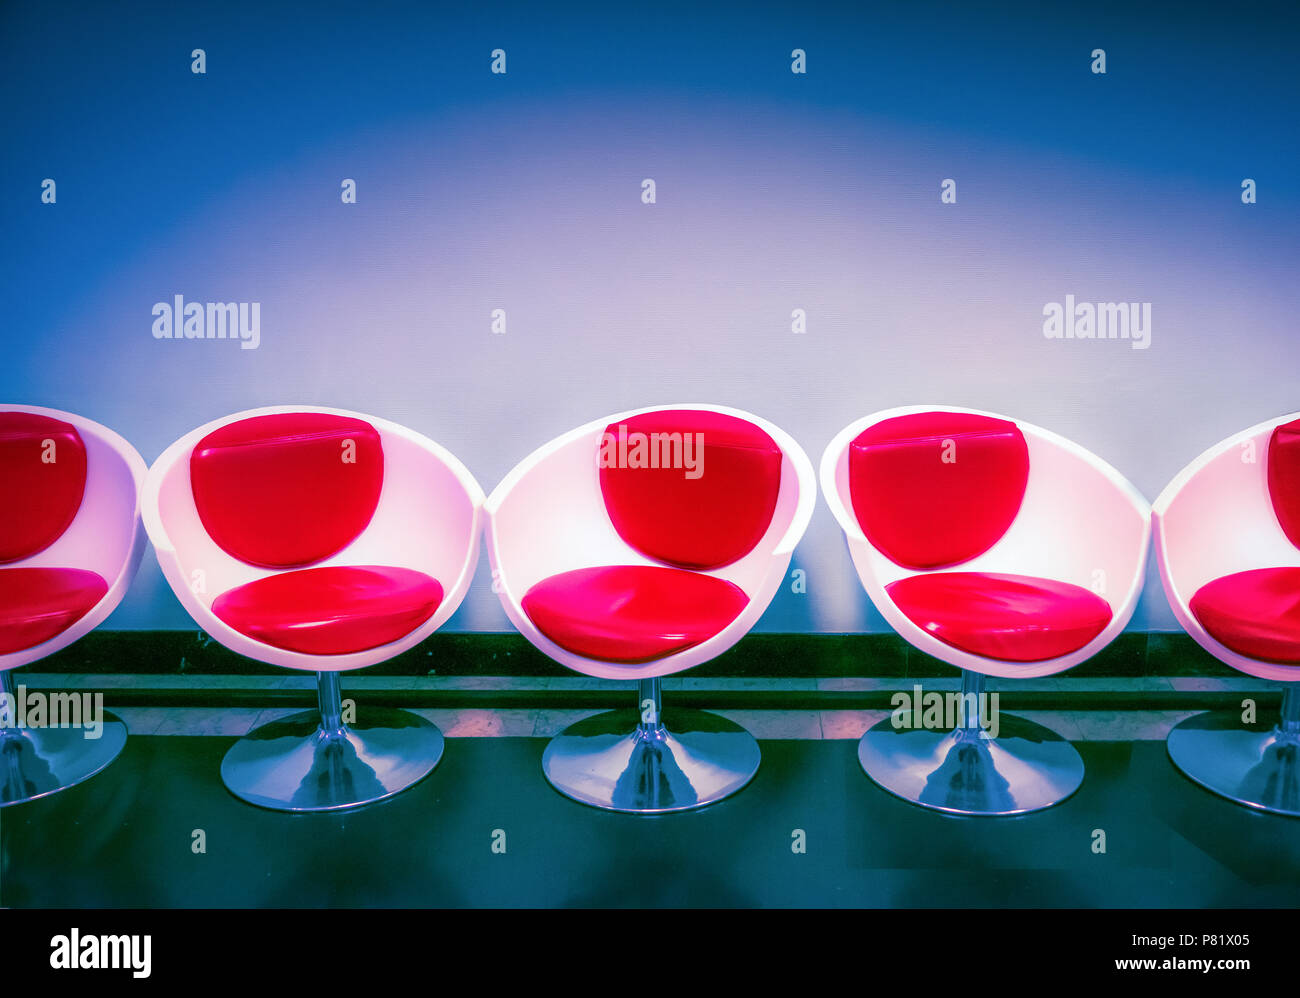 Lisbon, Portugal, stylish chairs in a lounge Stock Photo